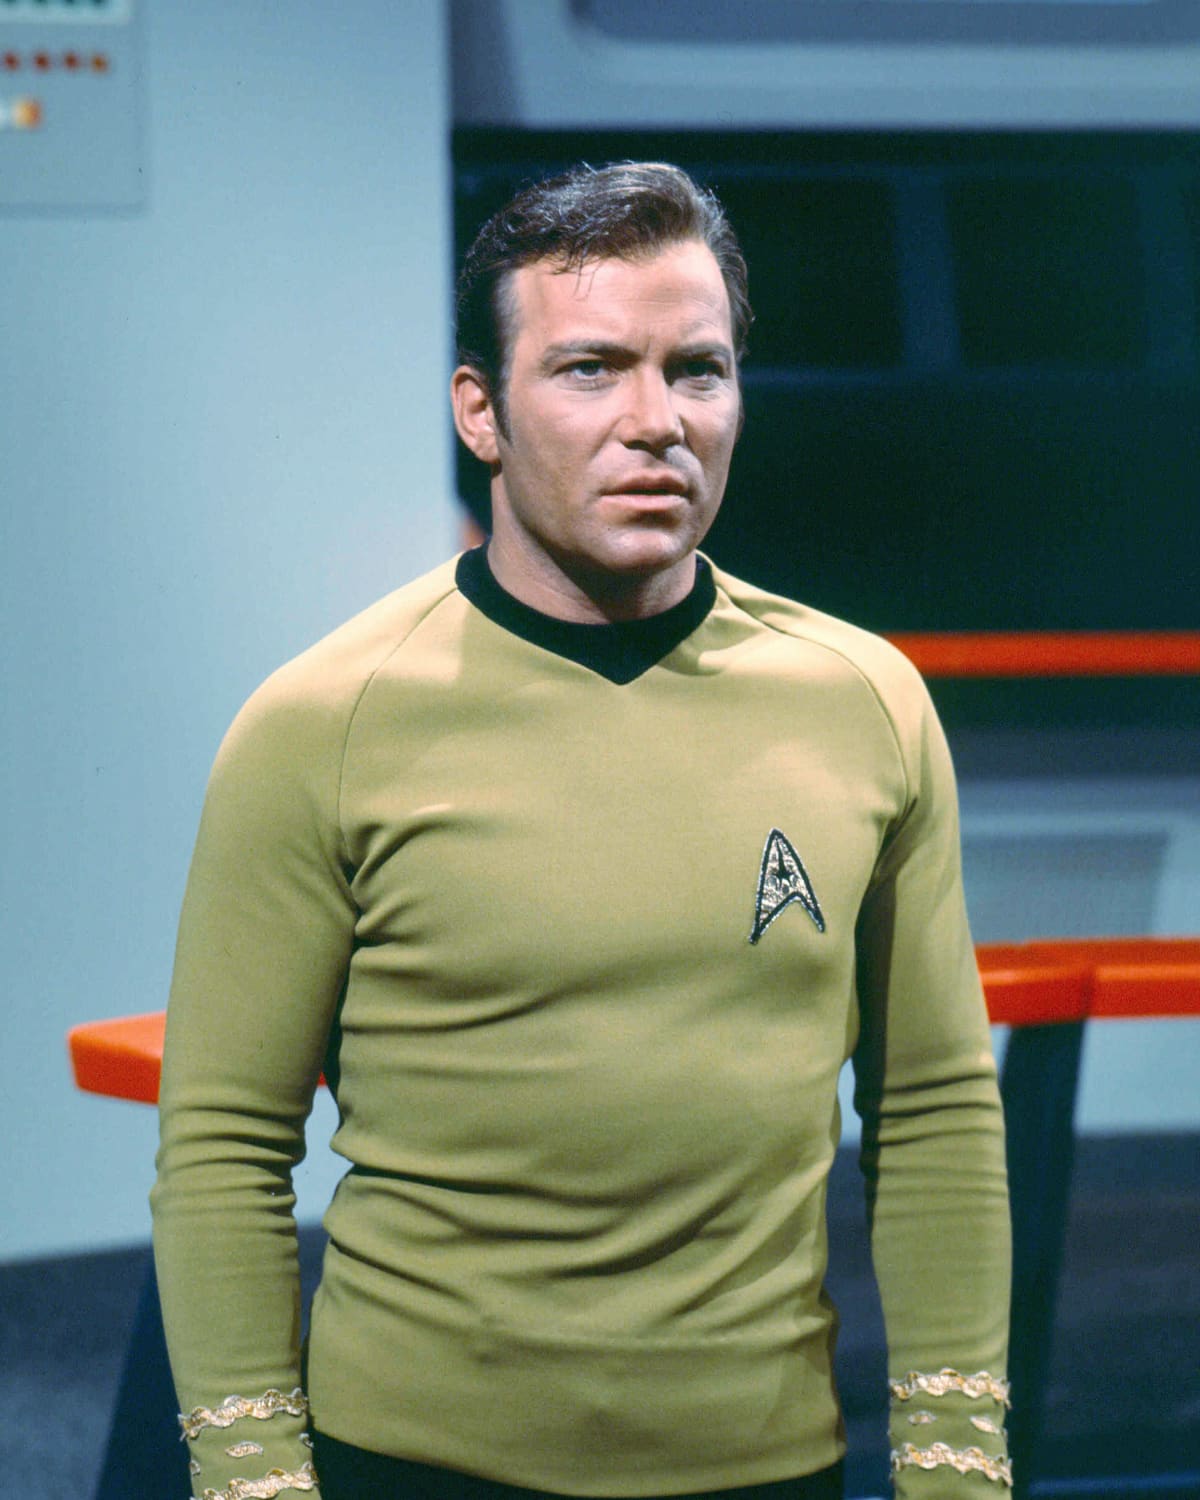 Canadian actor William Shatner as Captain James T. Kirk of the Starship Enterprise in the classic science fiction television series 'Star Trek', circa 1968. 